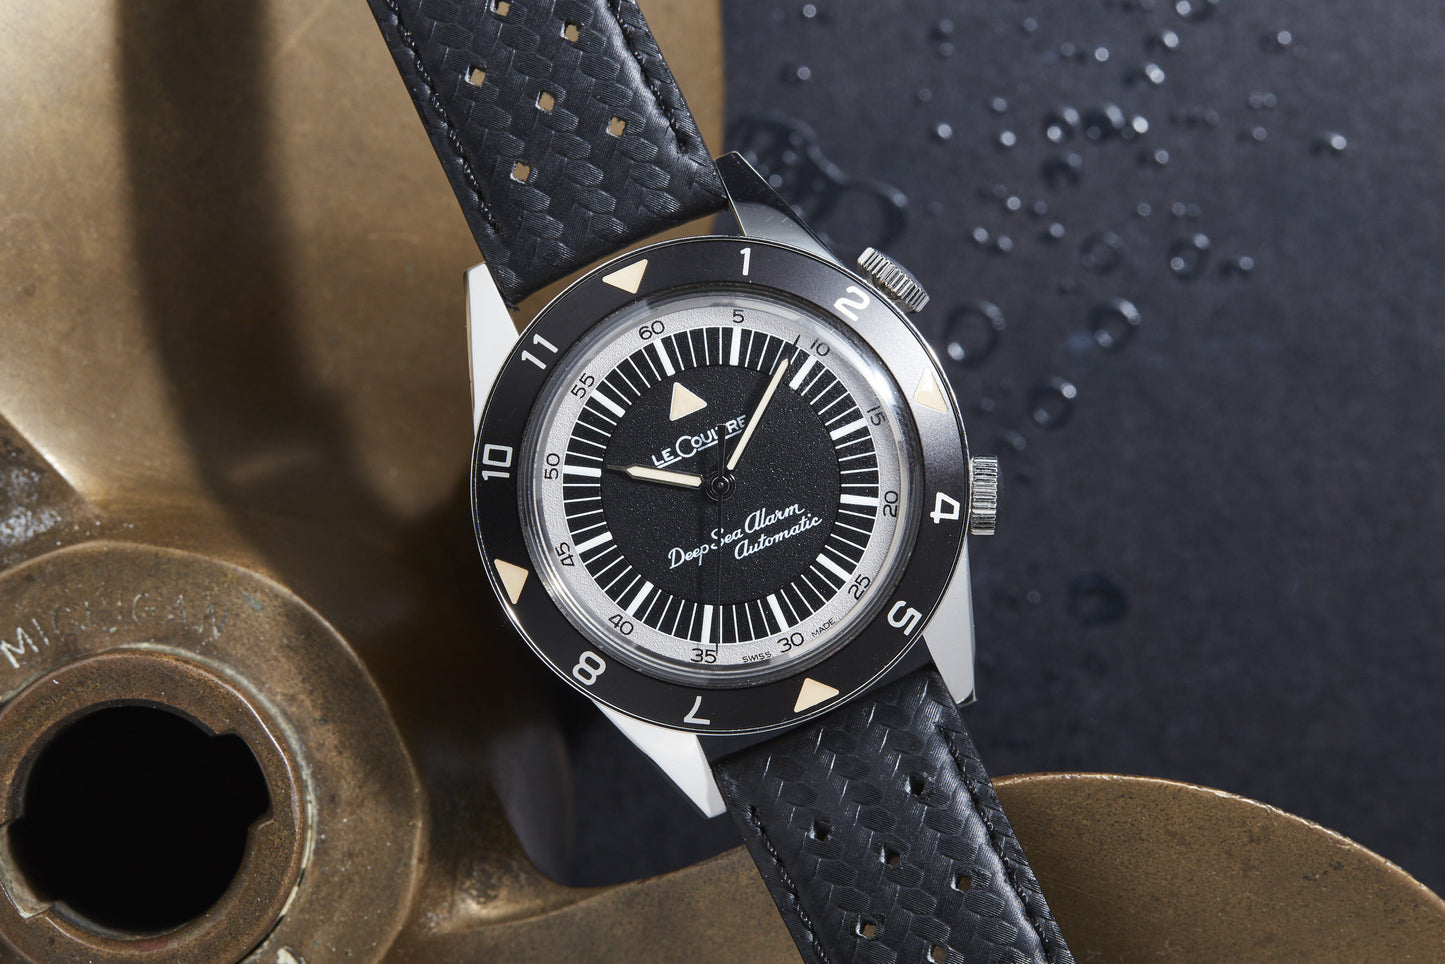 Jaeger-LeCoultre Tribute to Deep Sea Alarm Box and Papers